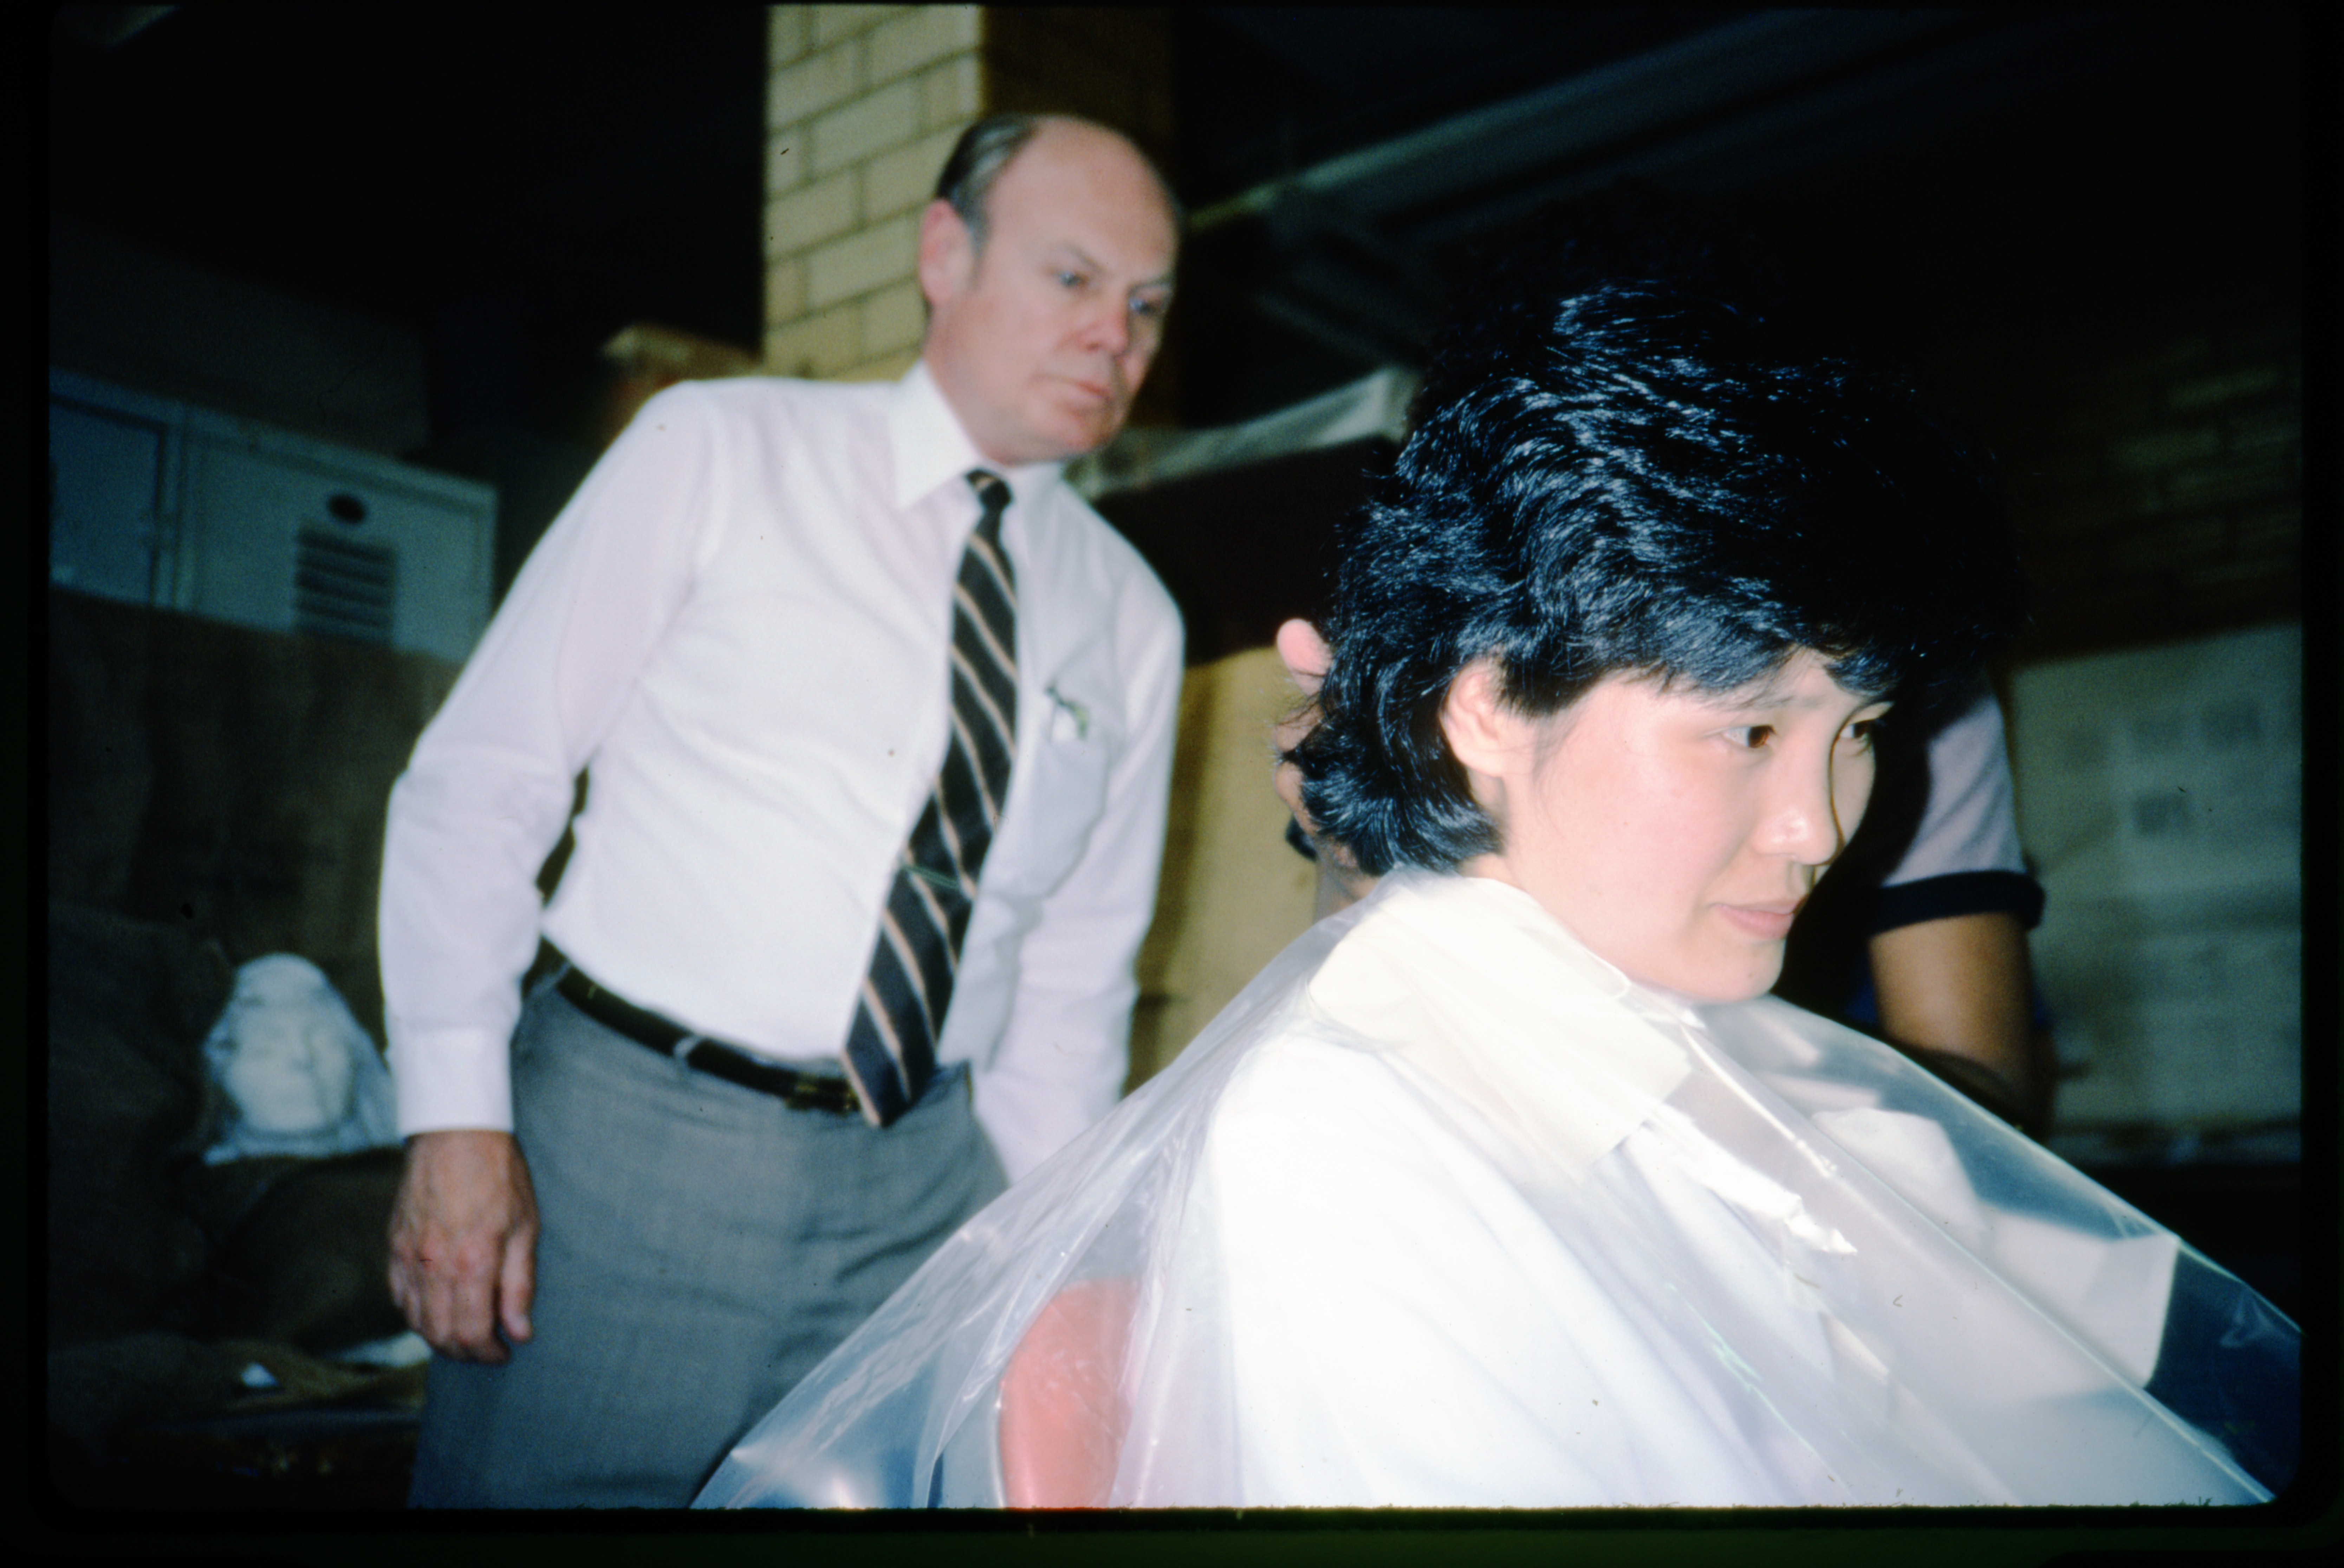 Model Chong-Hwa Lim sits to have a mold of her face made as manager Ralph Bauer looks on.